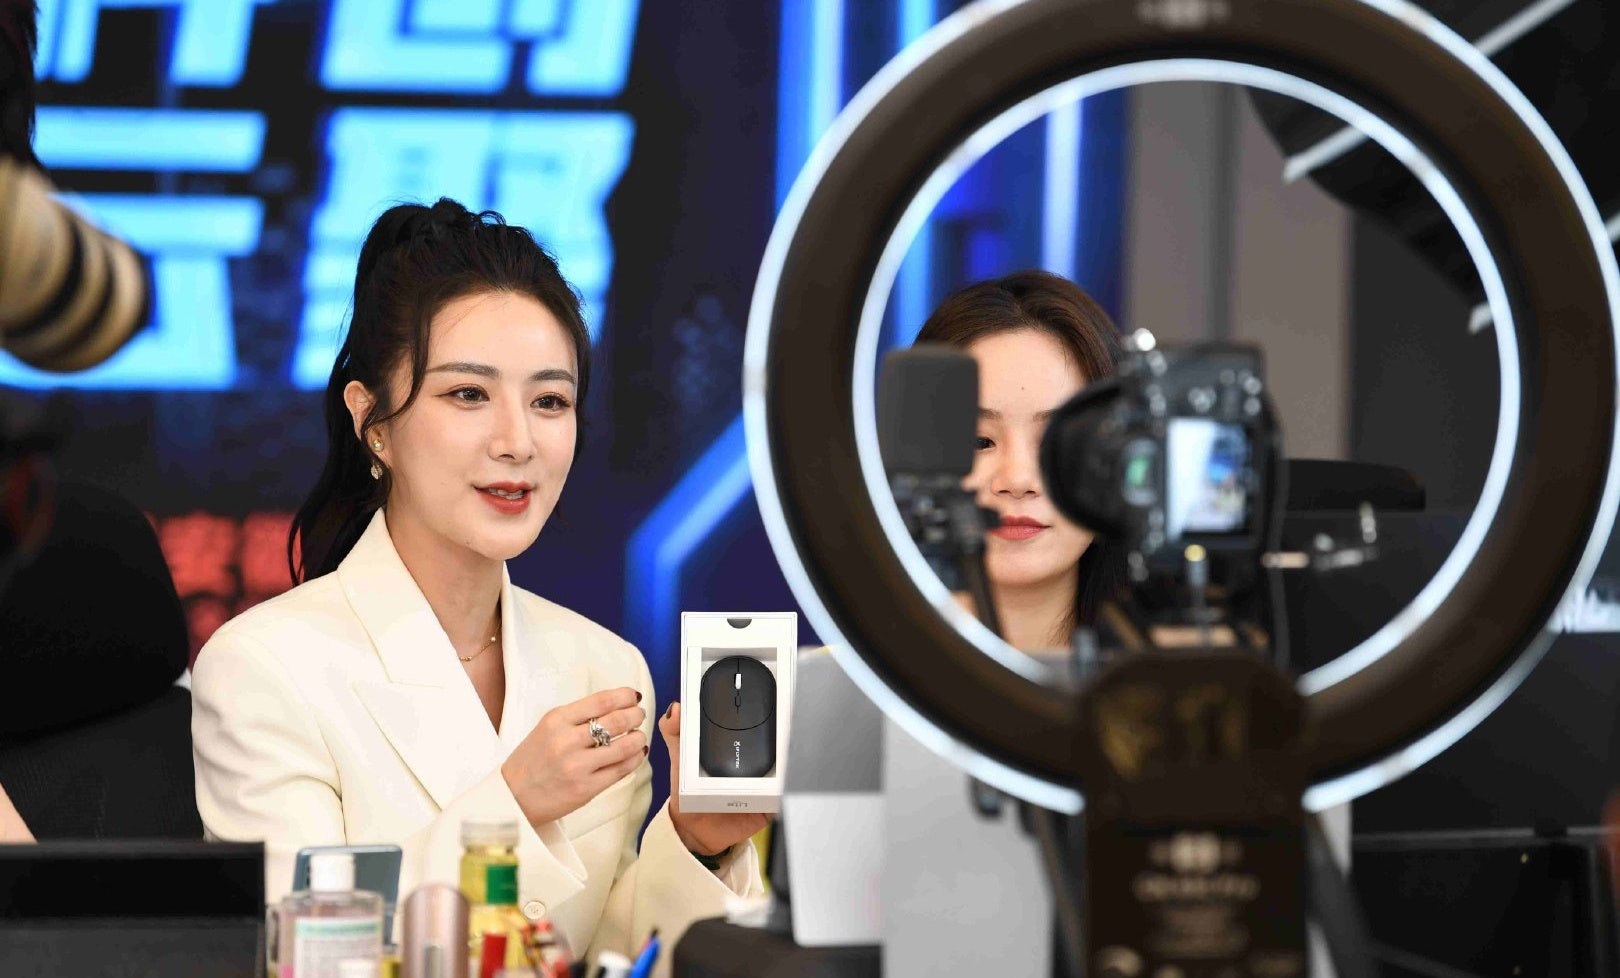 Viya, China’s “queen of livestreaming,” has been fined $210.2 million for tax evasion. But what does that mean for China’s once-booming livestream economy? Photo: Weibo